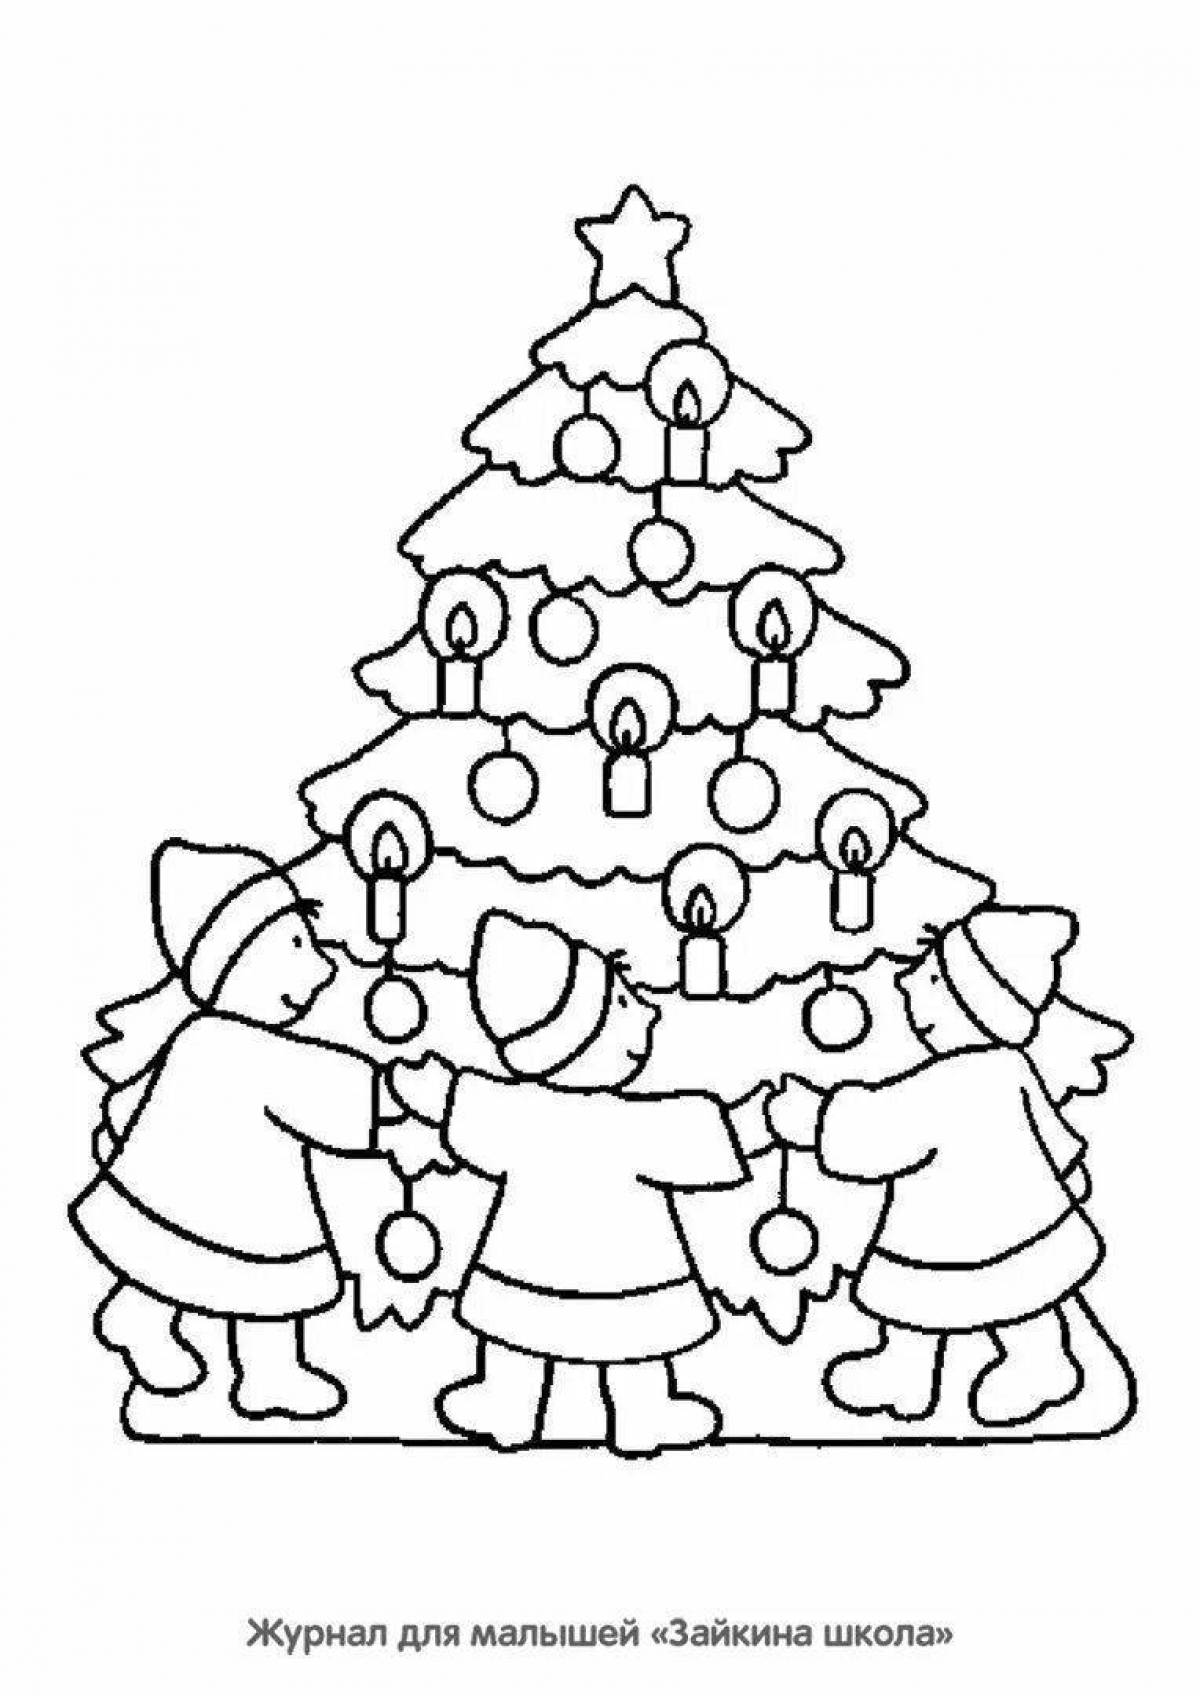 Coloring book sparkling forest raised a Christmas tree